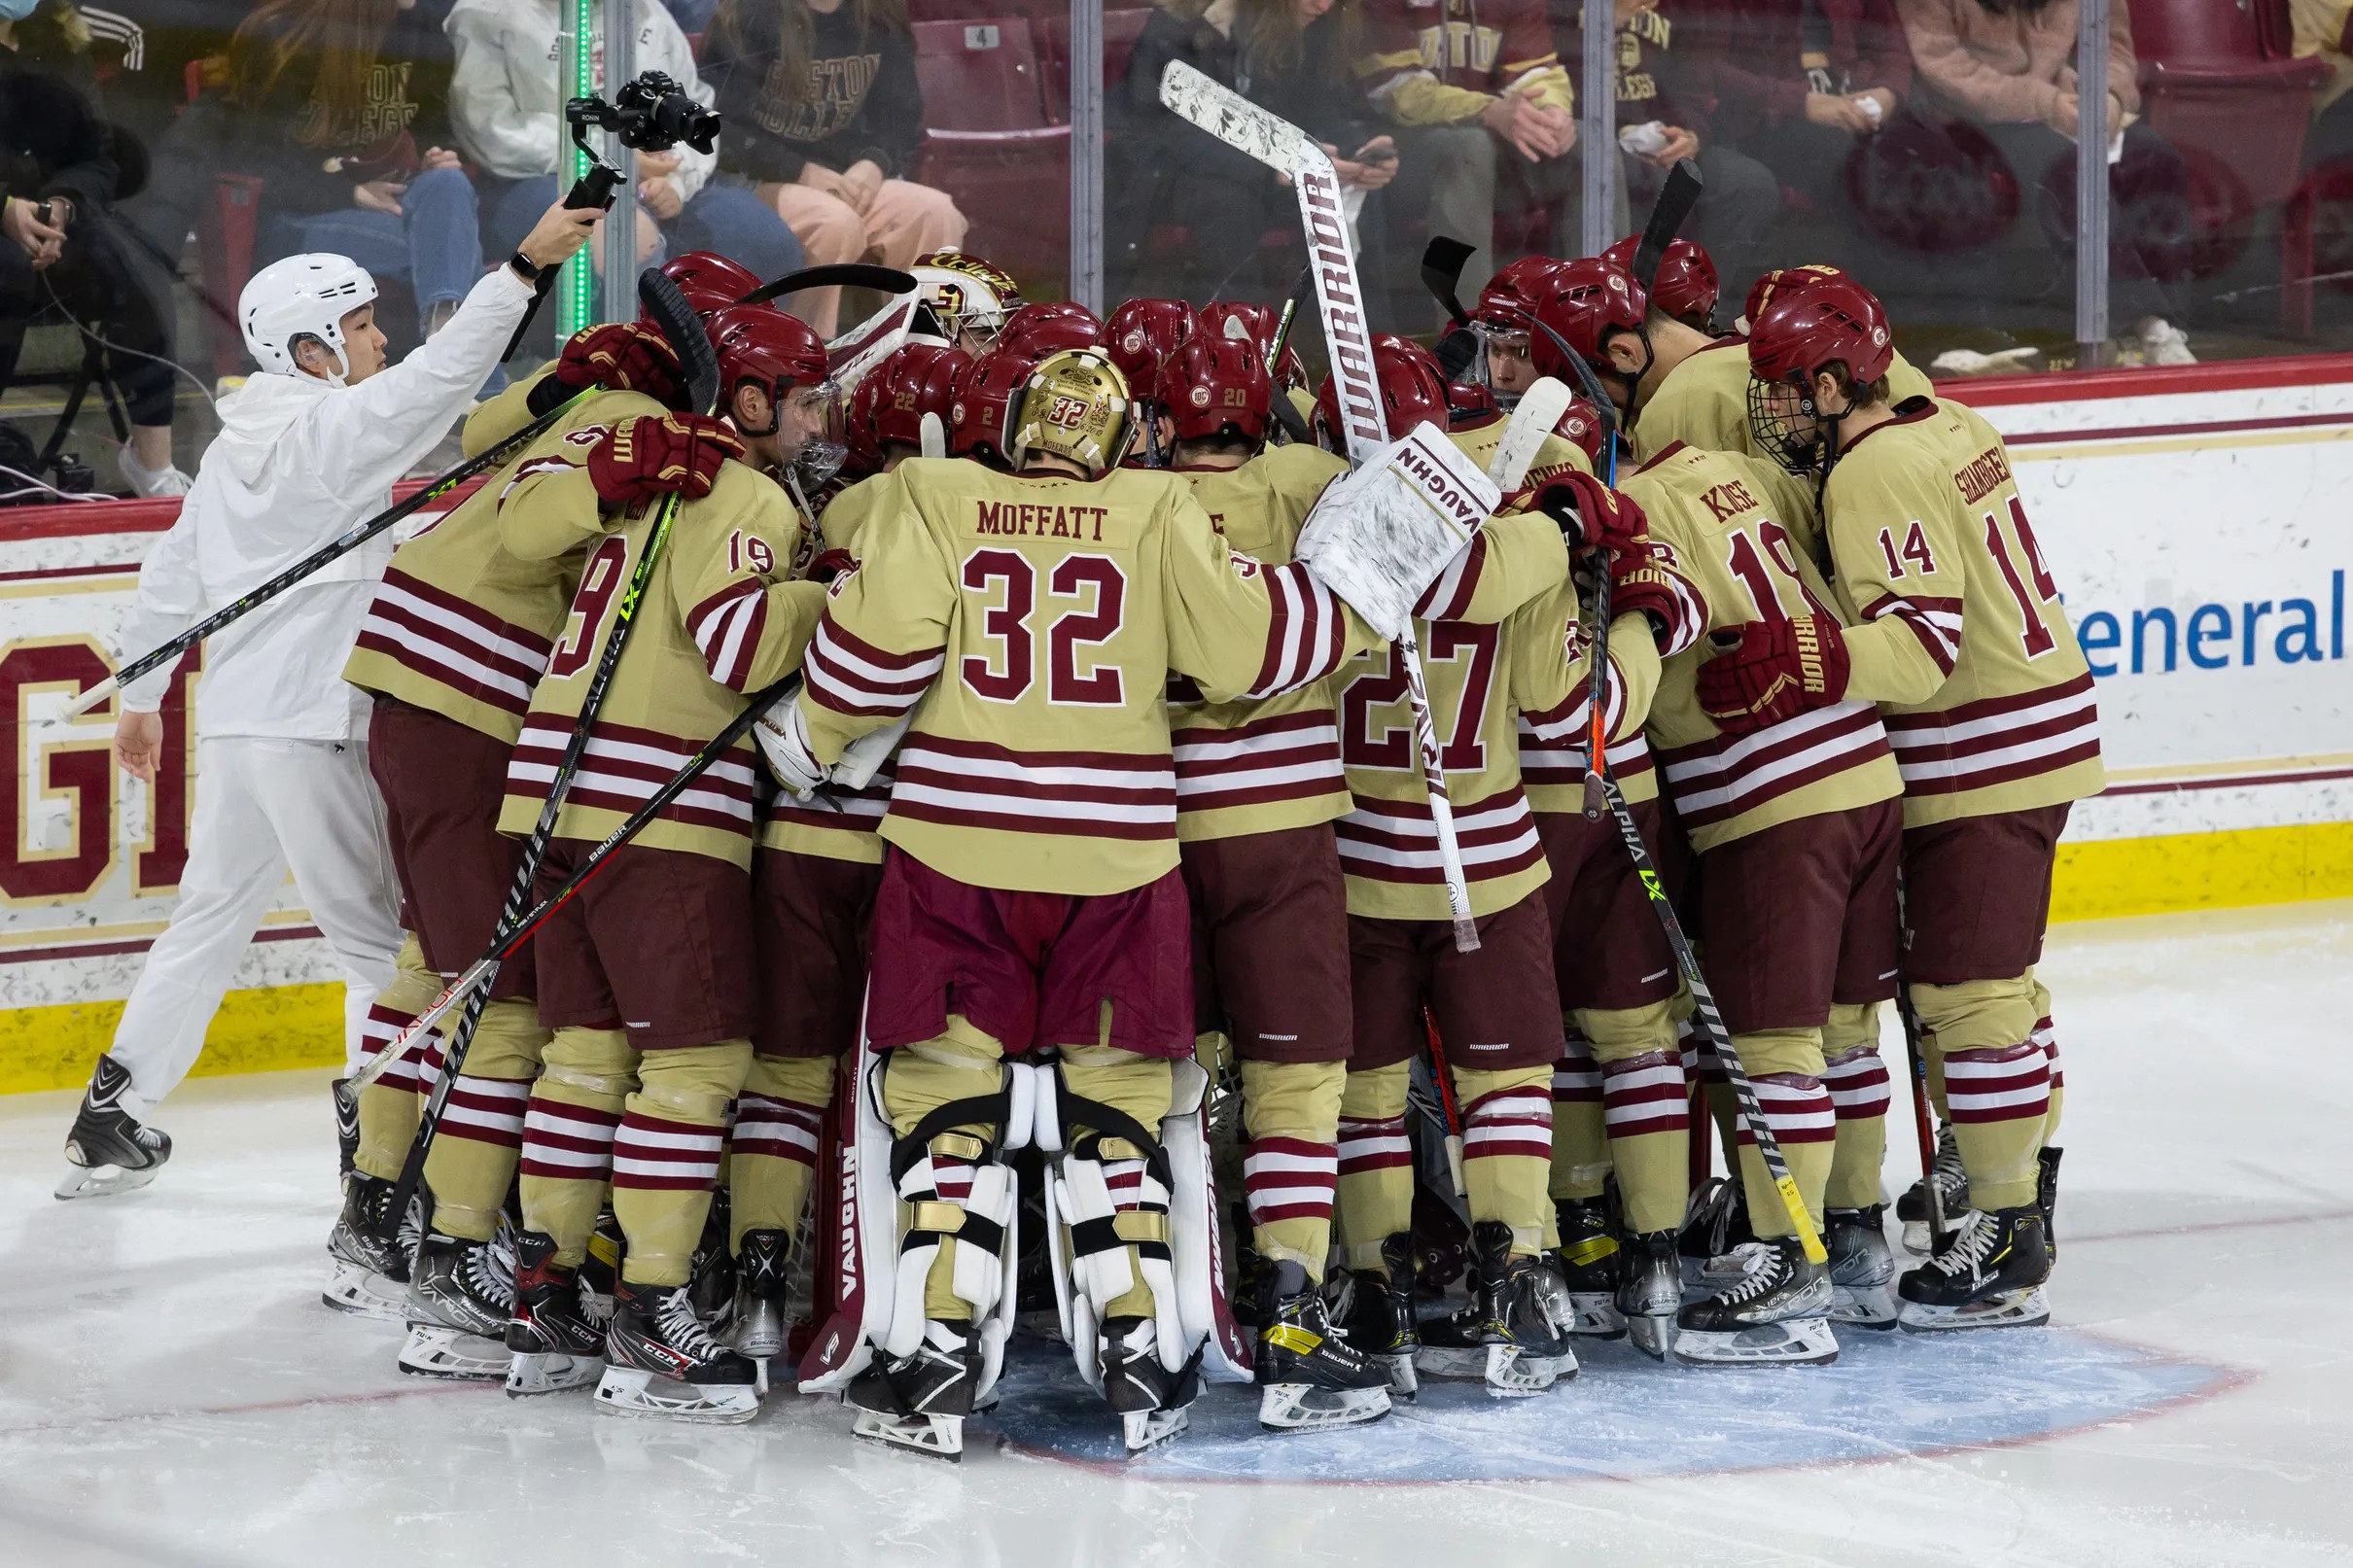 BC Hockey Blog: “Three finalists” for next head coach - including one  potential huge splash?